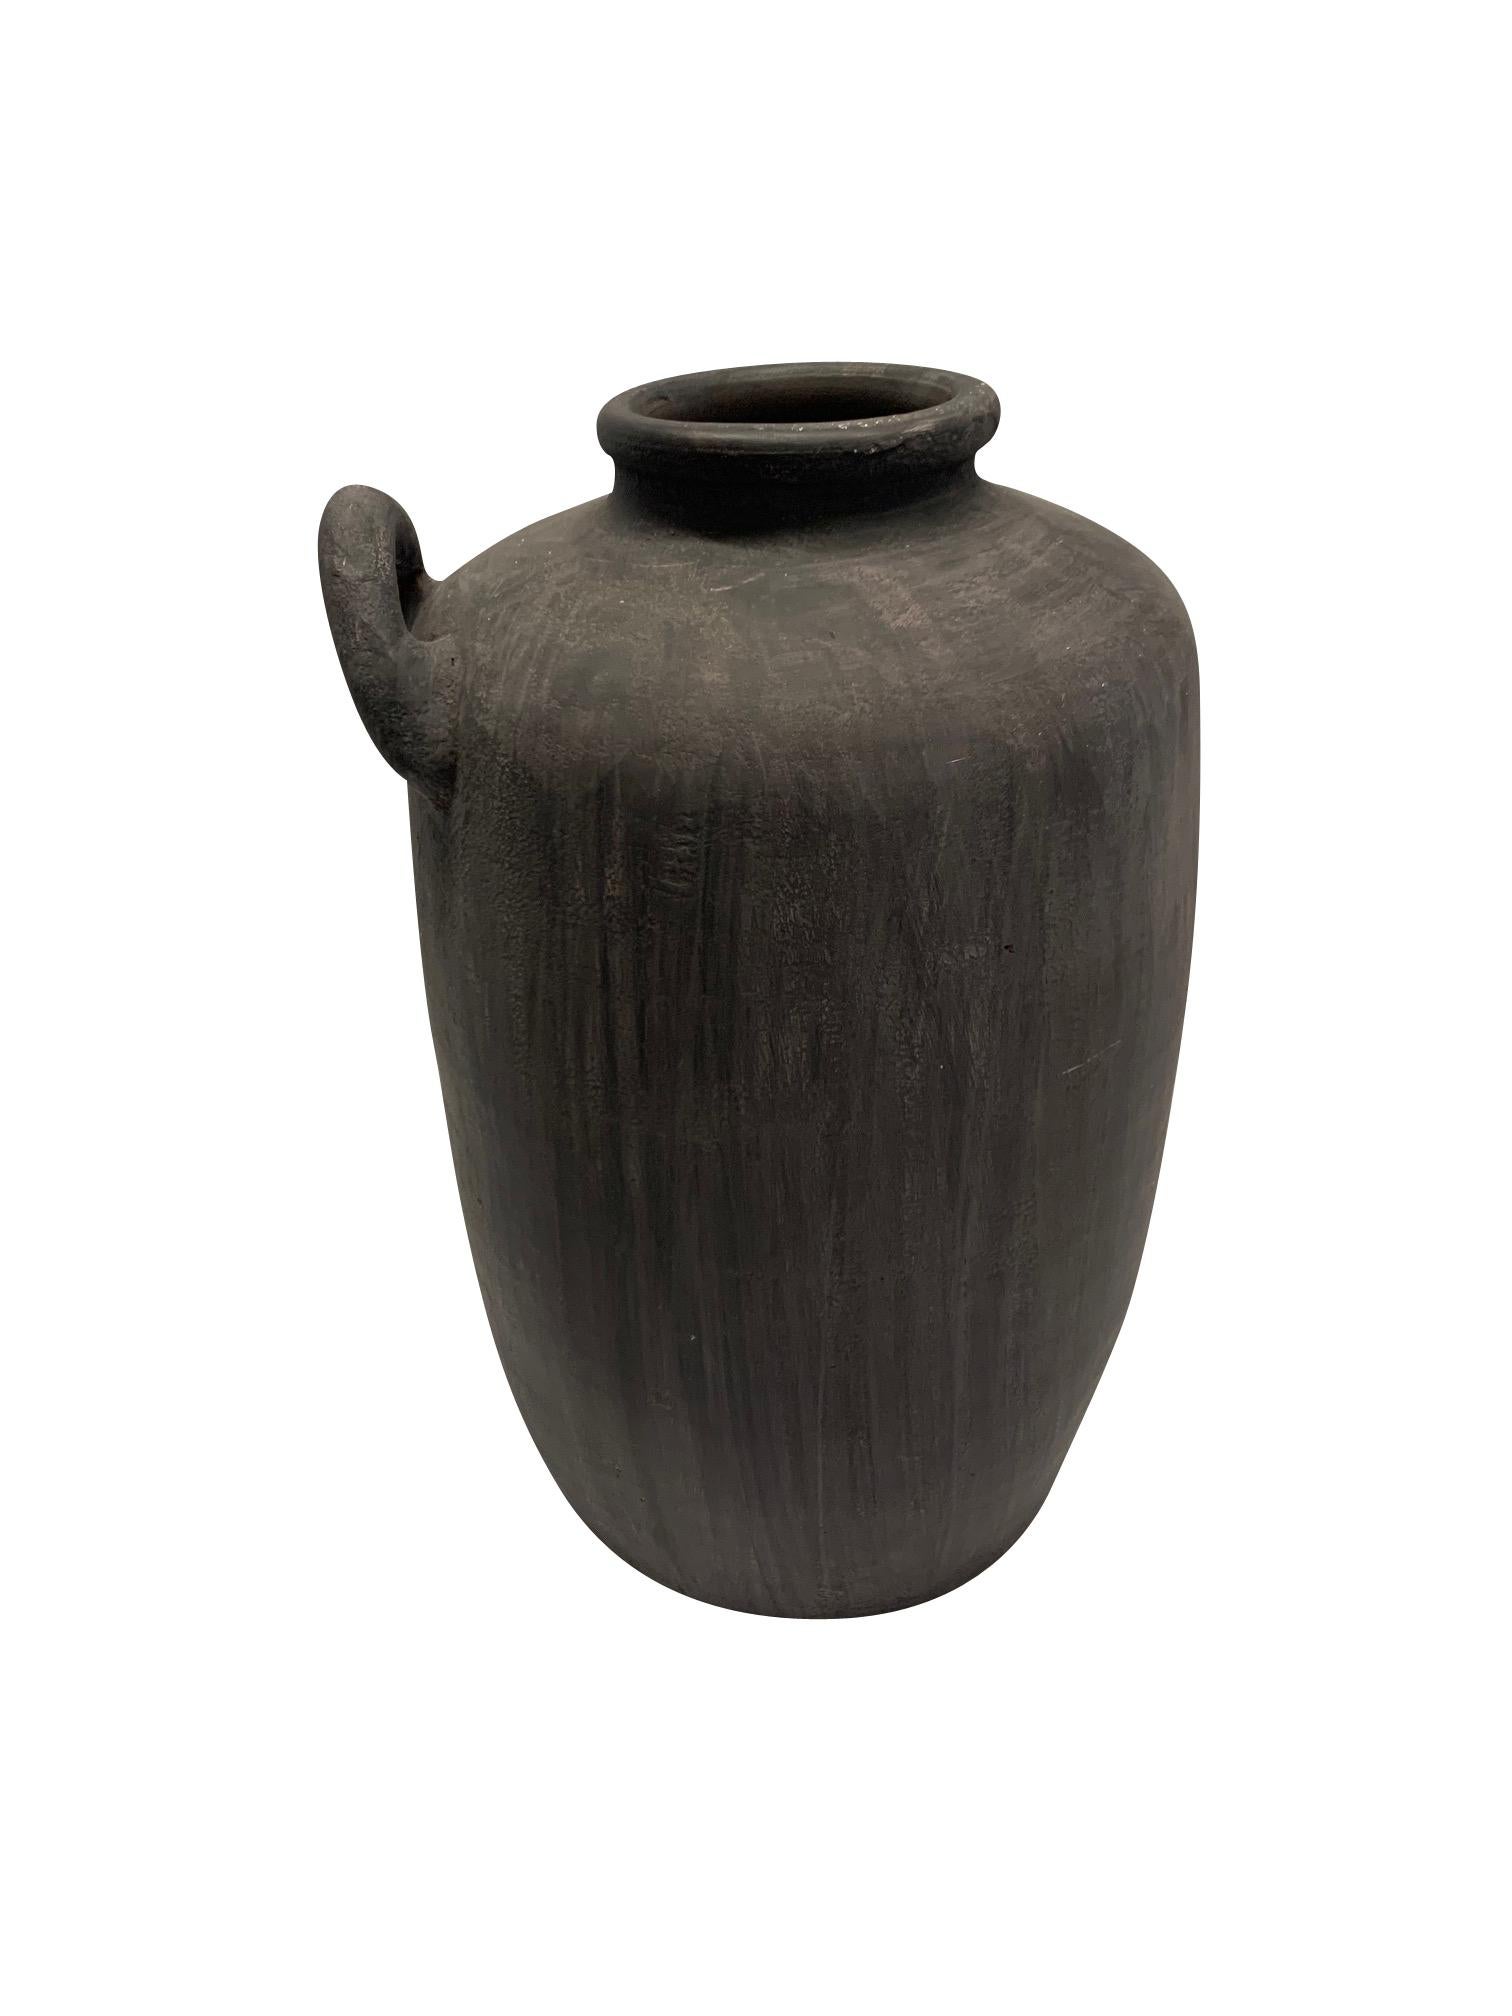 Contemporary Chinese vase with cement ( dark grey ) colored glaze having a weathered appearance.
Single handle.
 